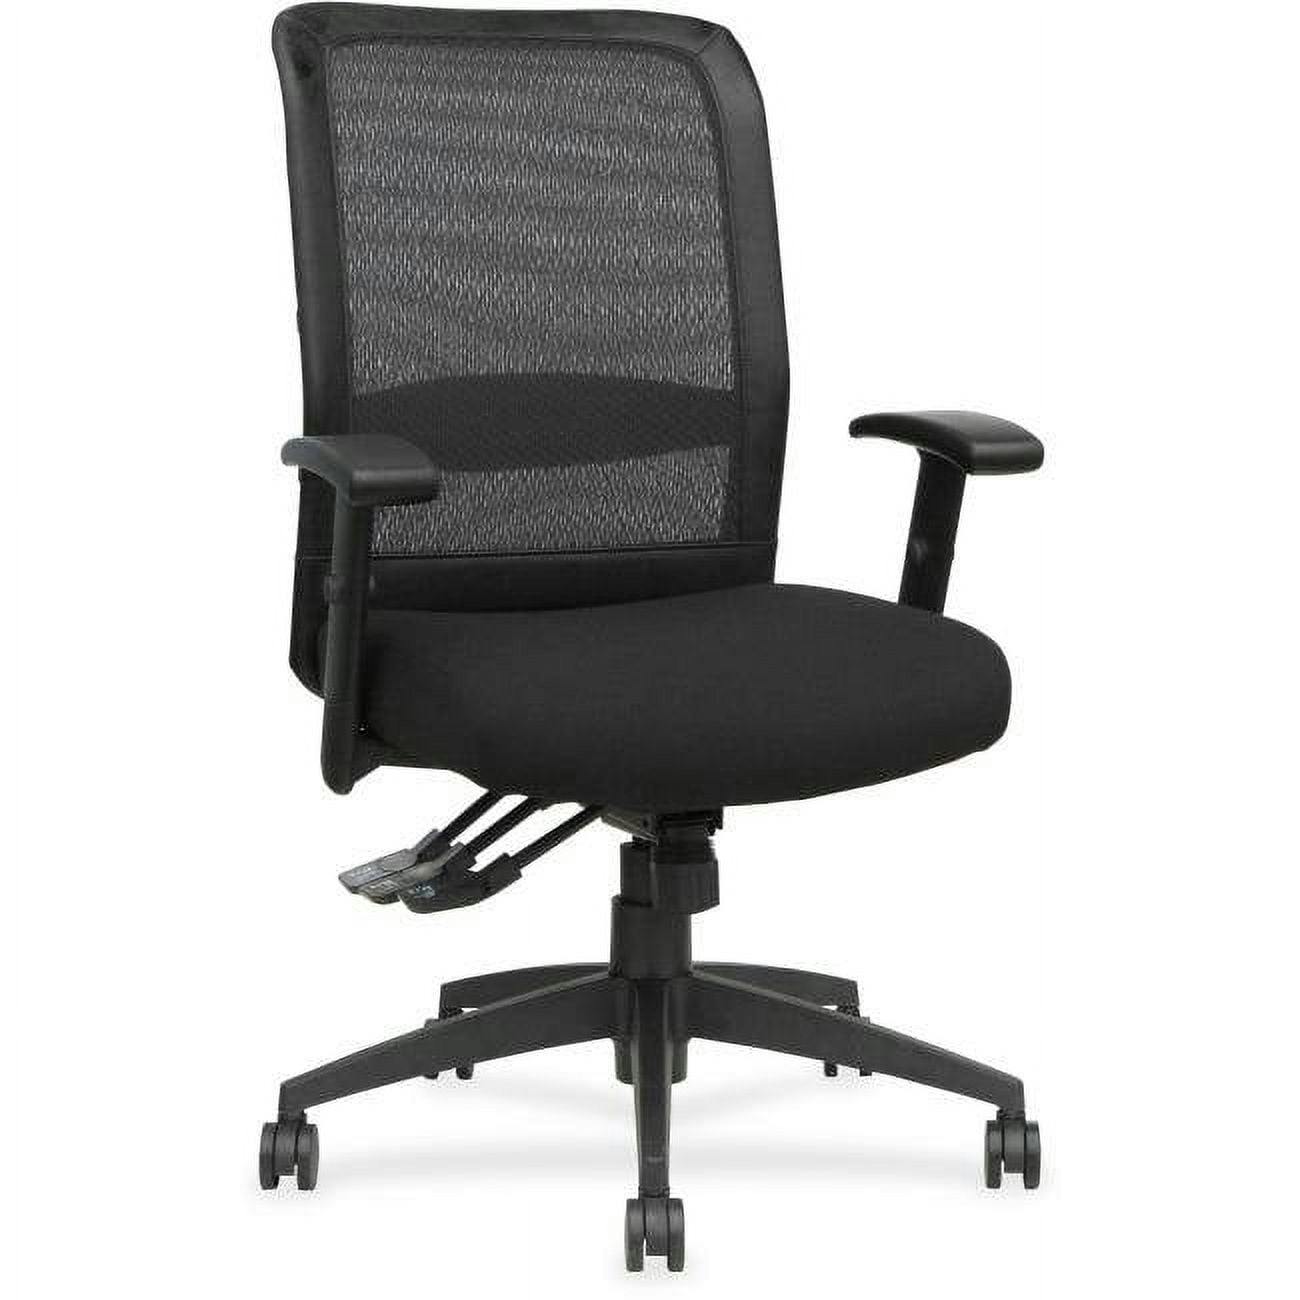 Executive High-Back Mesh Swivel Chair with Adjustable Arms - Black